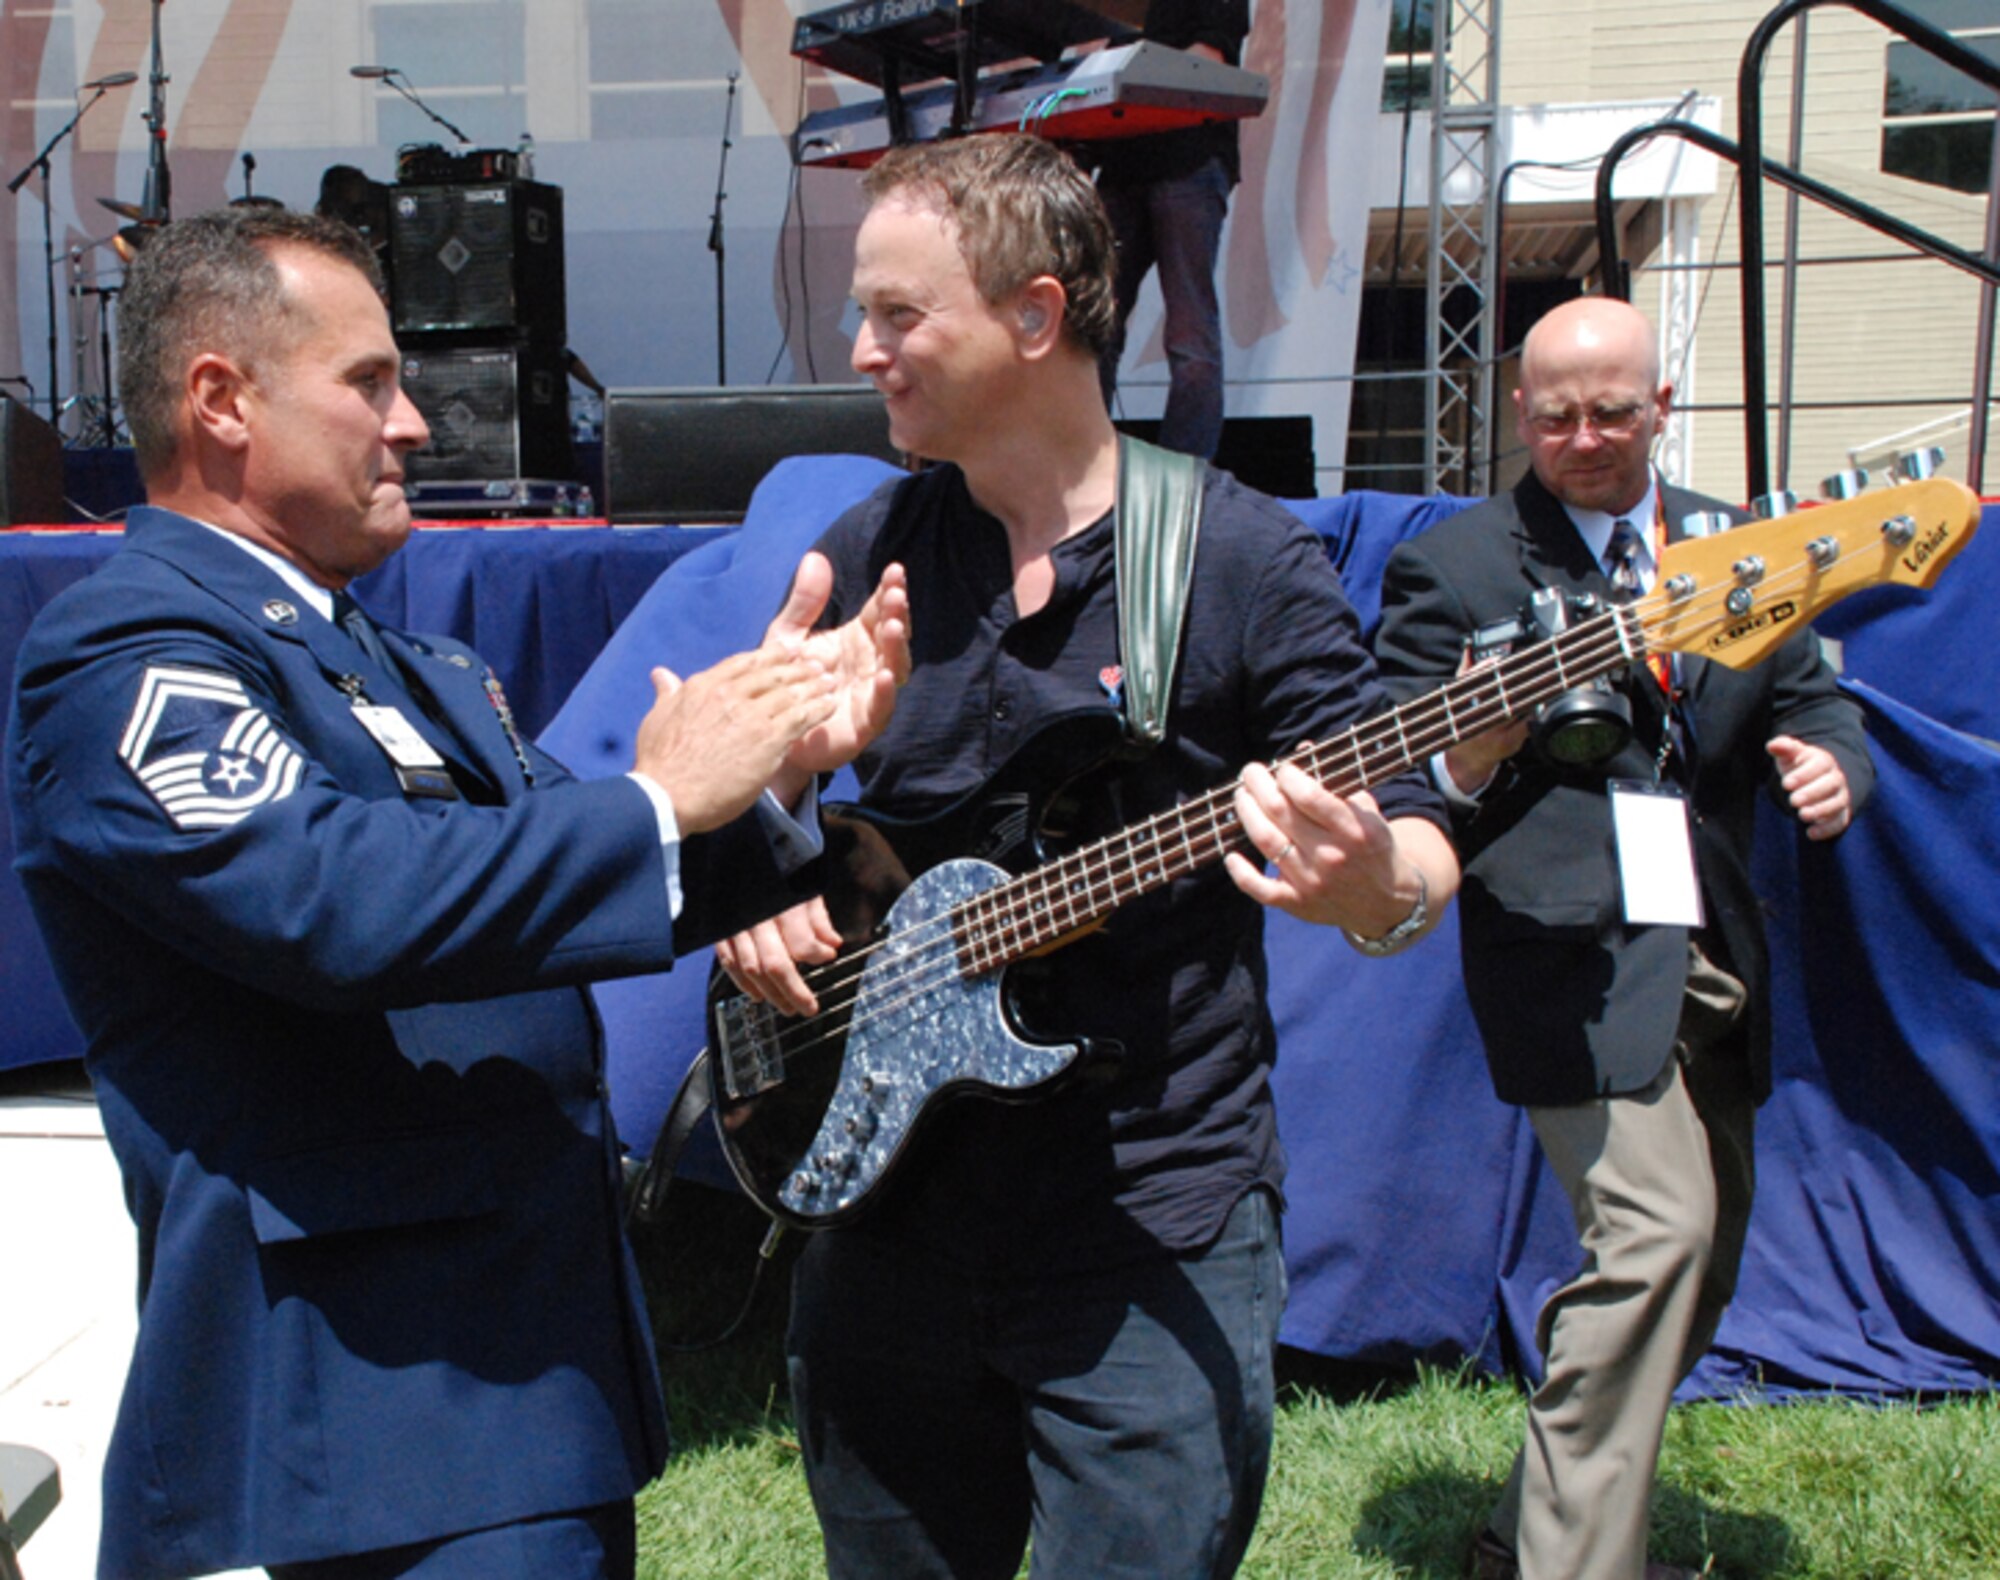 PATRICK AIR FORCE BASE, Fla. -- Senior Master Sgt. Rene Rubiella of the 920th Rescue Wing rocks out with actor and musician Gary Sinise at a special concert following the USA Freedom Corps President's Volunteer Service Awards ceremony.  Rubiella was one of seven military members honored at the White House for their community service.  After the ceremony, Gary Sinise and the "Lt. Dan Band" provided a special concert for the award recipients and their guests. (U.S. Air Force photo/Capt. Cathleen Snow)